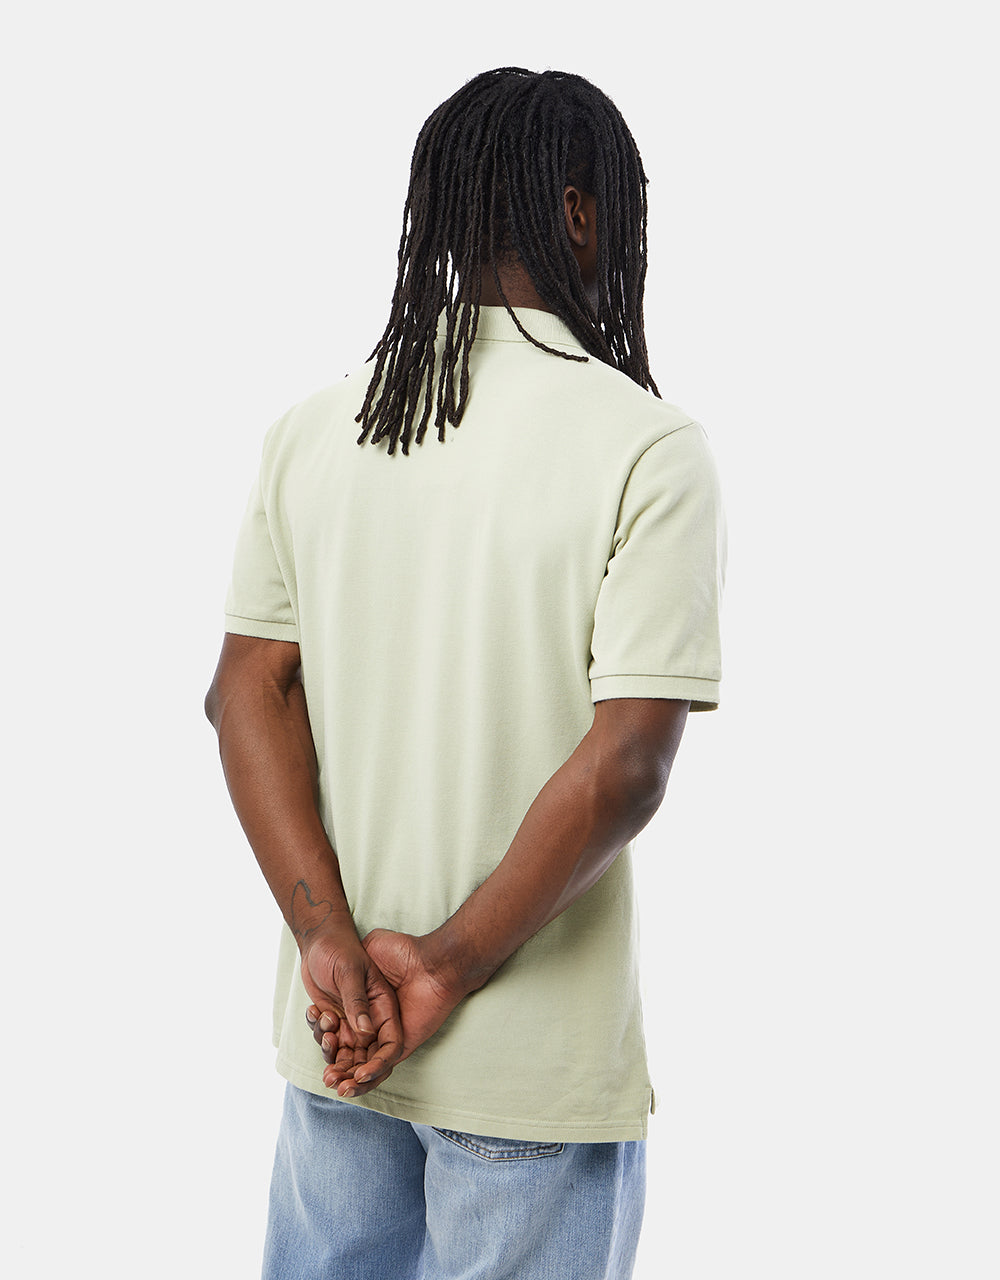 Carhartt WIP S/S Chase Pique Polo - Agave/Gold